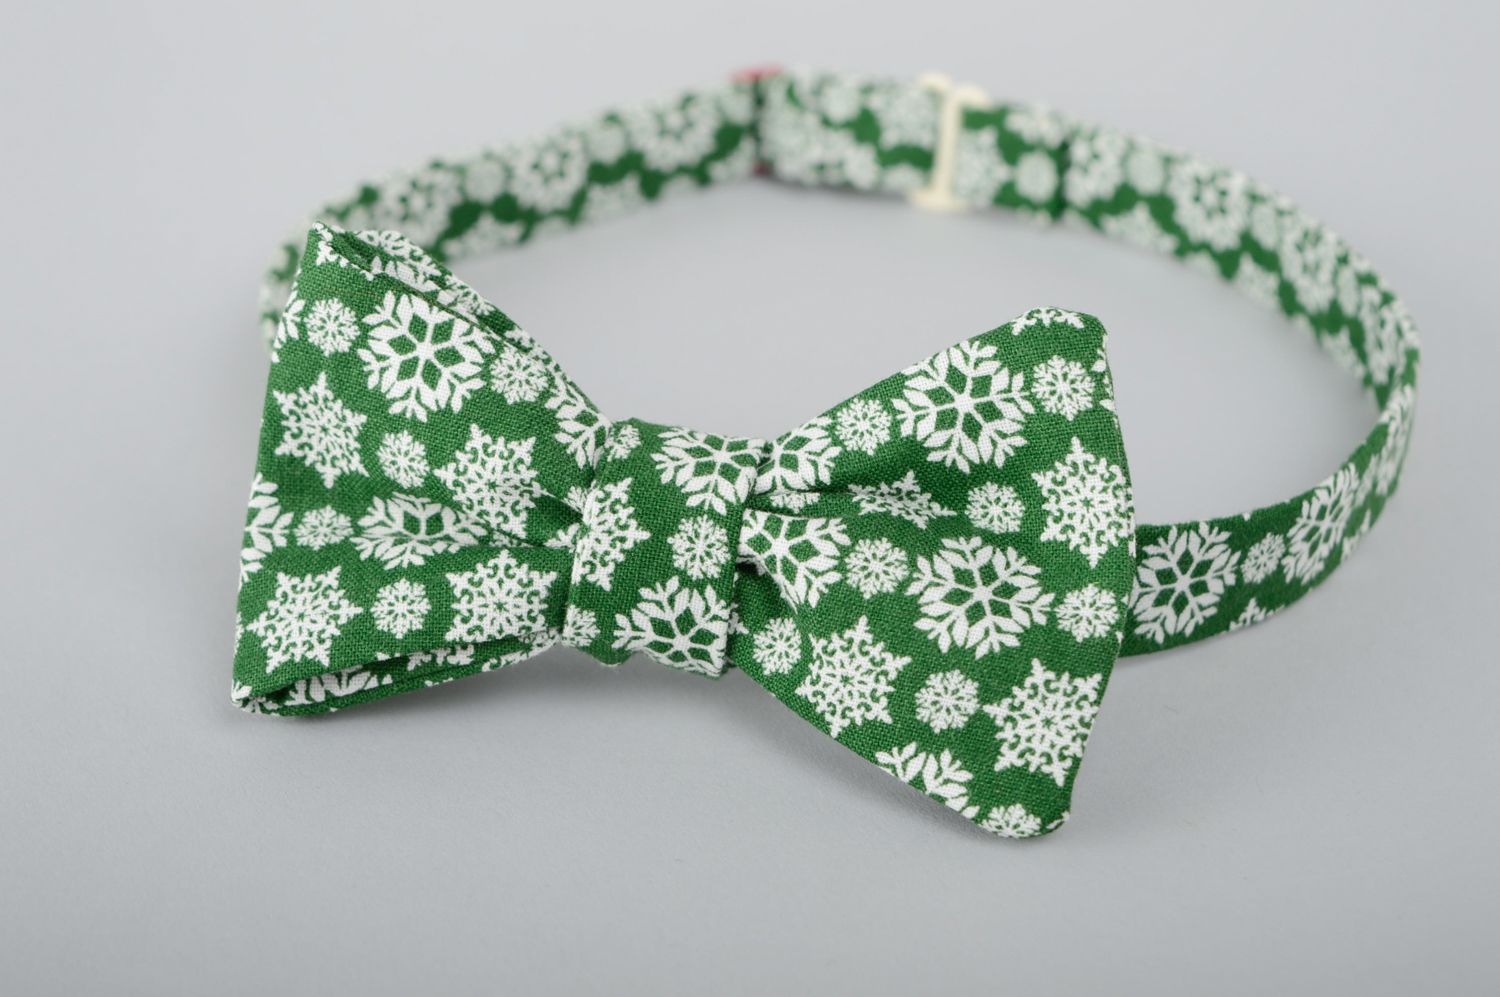 Green fabric bow tie with snowflakes photo 1